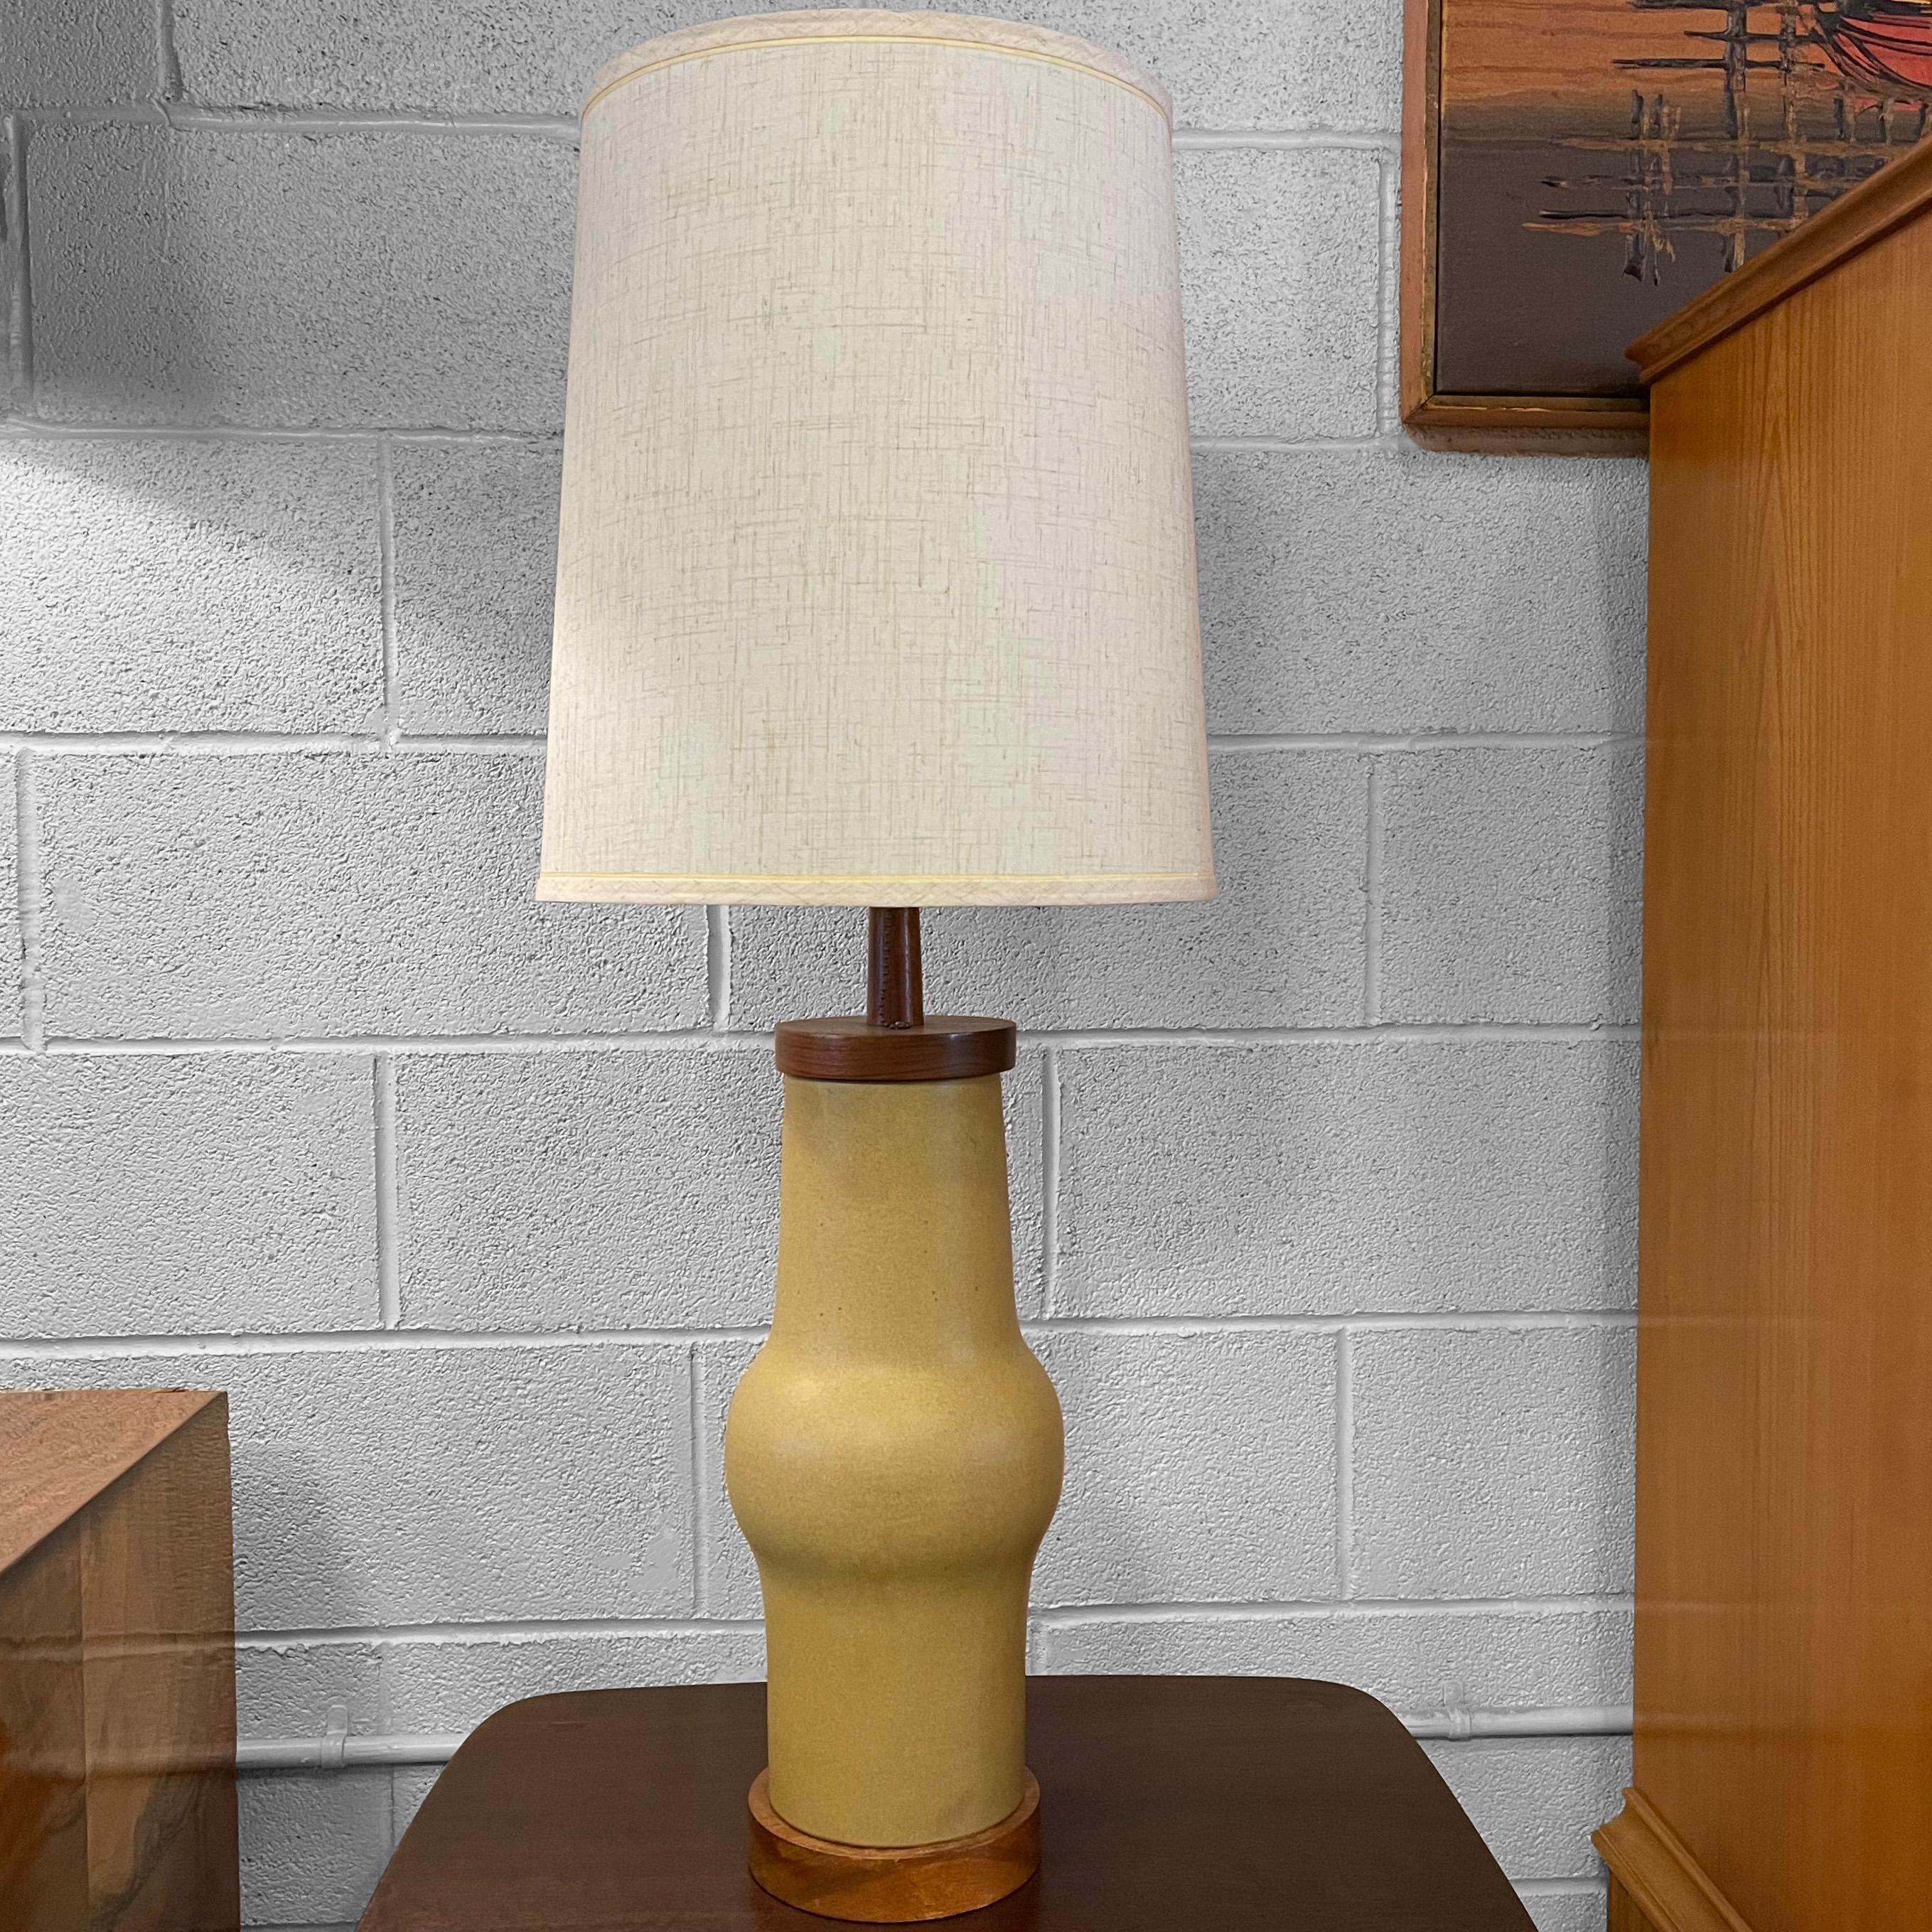 Mid-Century Modern, art pottery, table lamp by Gordon Martz for Marshall Studios features an organically shaped, matte glaze, tan ceramic base with walnut accents and brass hardware. The lamp measures 24 inches to the socket. The shade shown can be